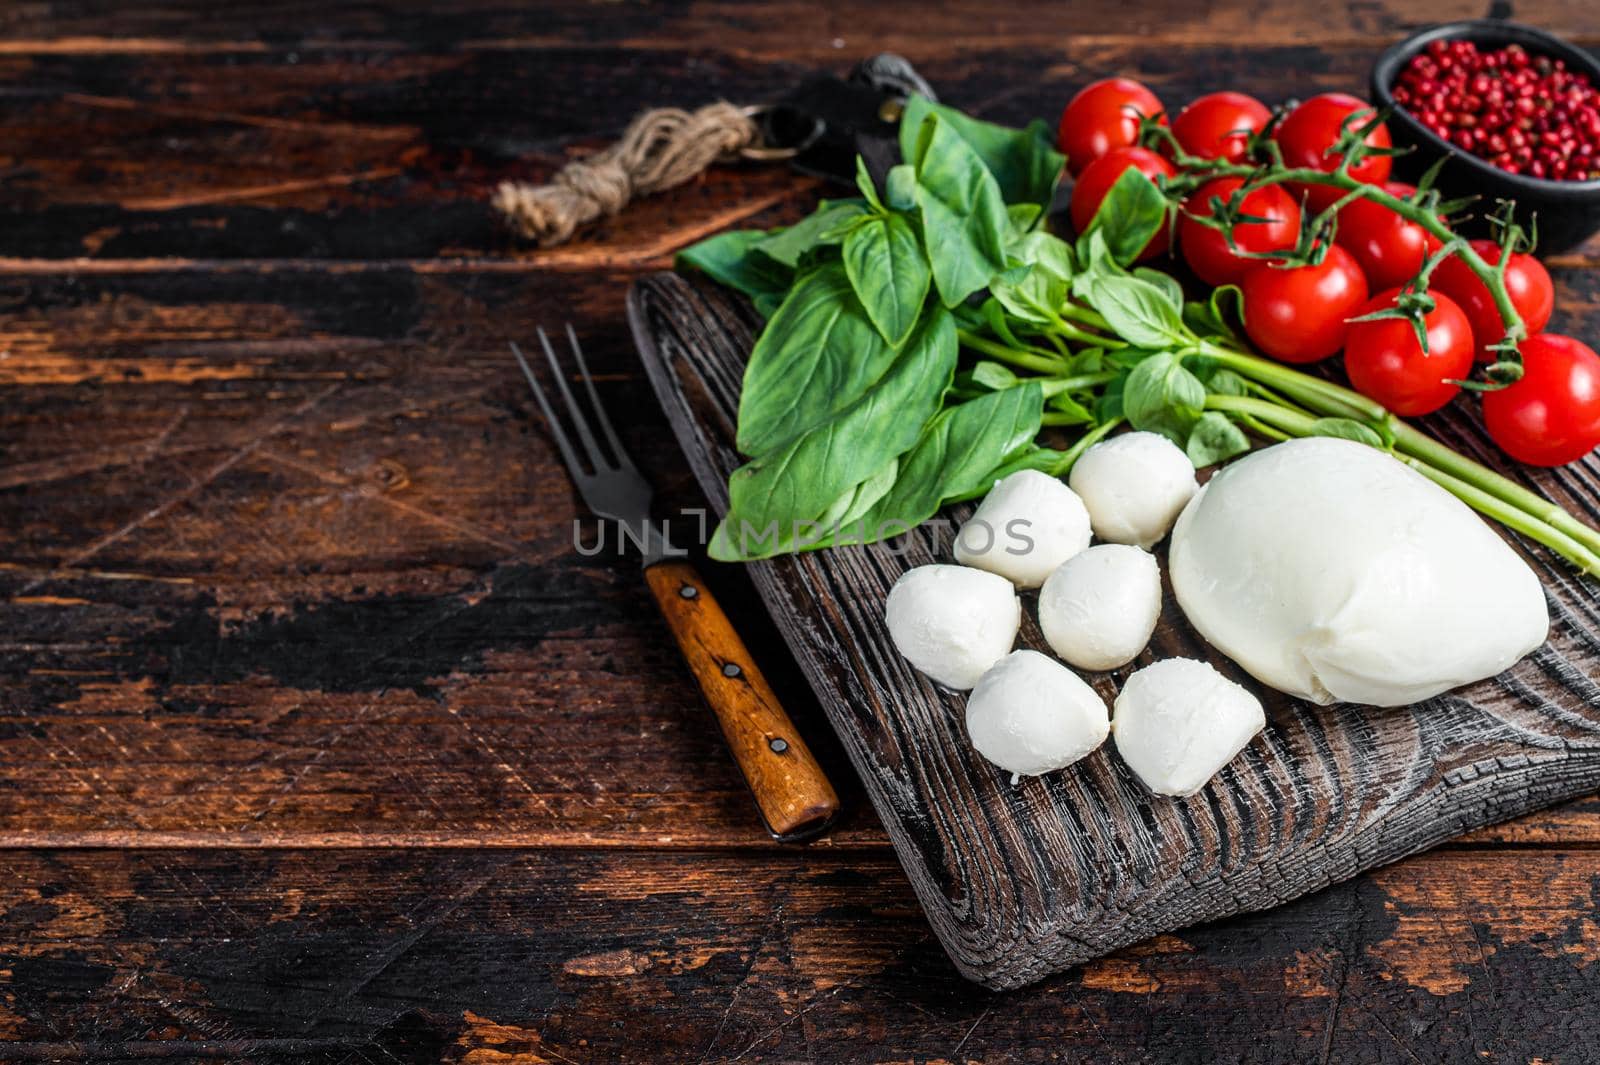 Mozzarella cheese, basil and tomato cherry on wooden board, Ingredients for Caprese salad. Dark wooden background. Top view. Copy space.